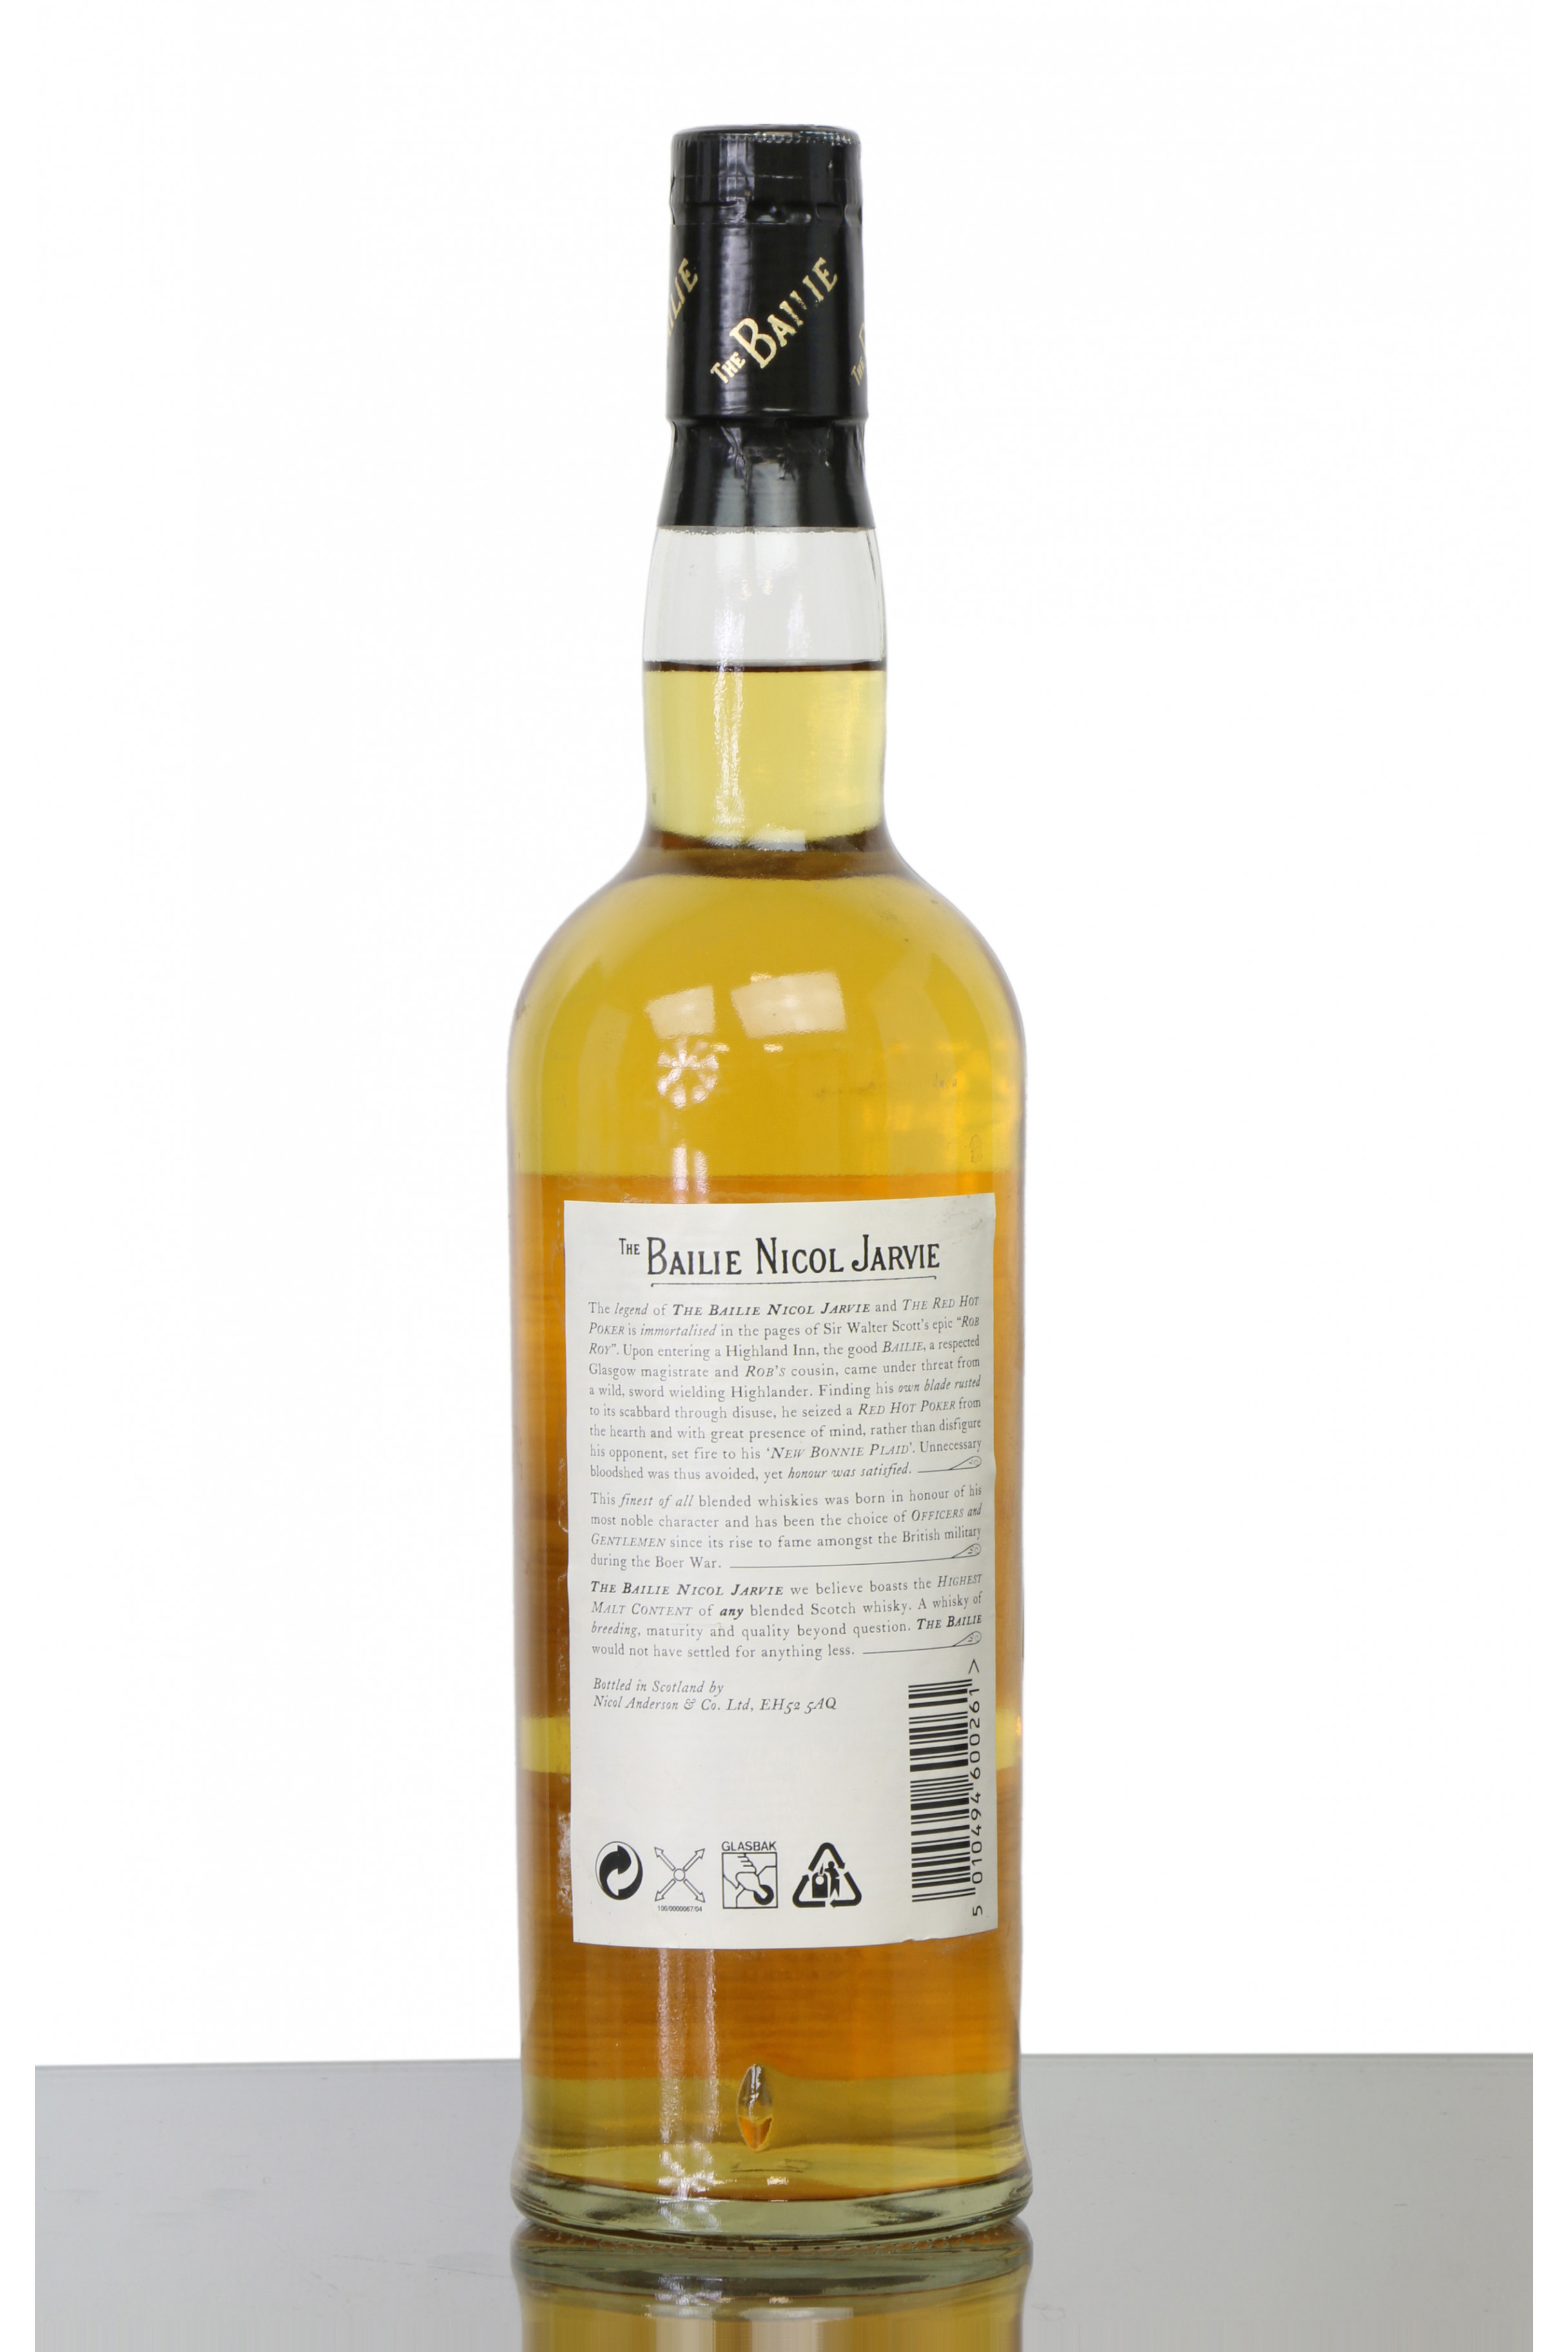 Bailie Nicol Jarvie Old Scotch Whisky - Nicol Anderson & Co. - Just ...